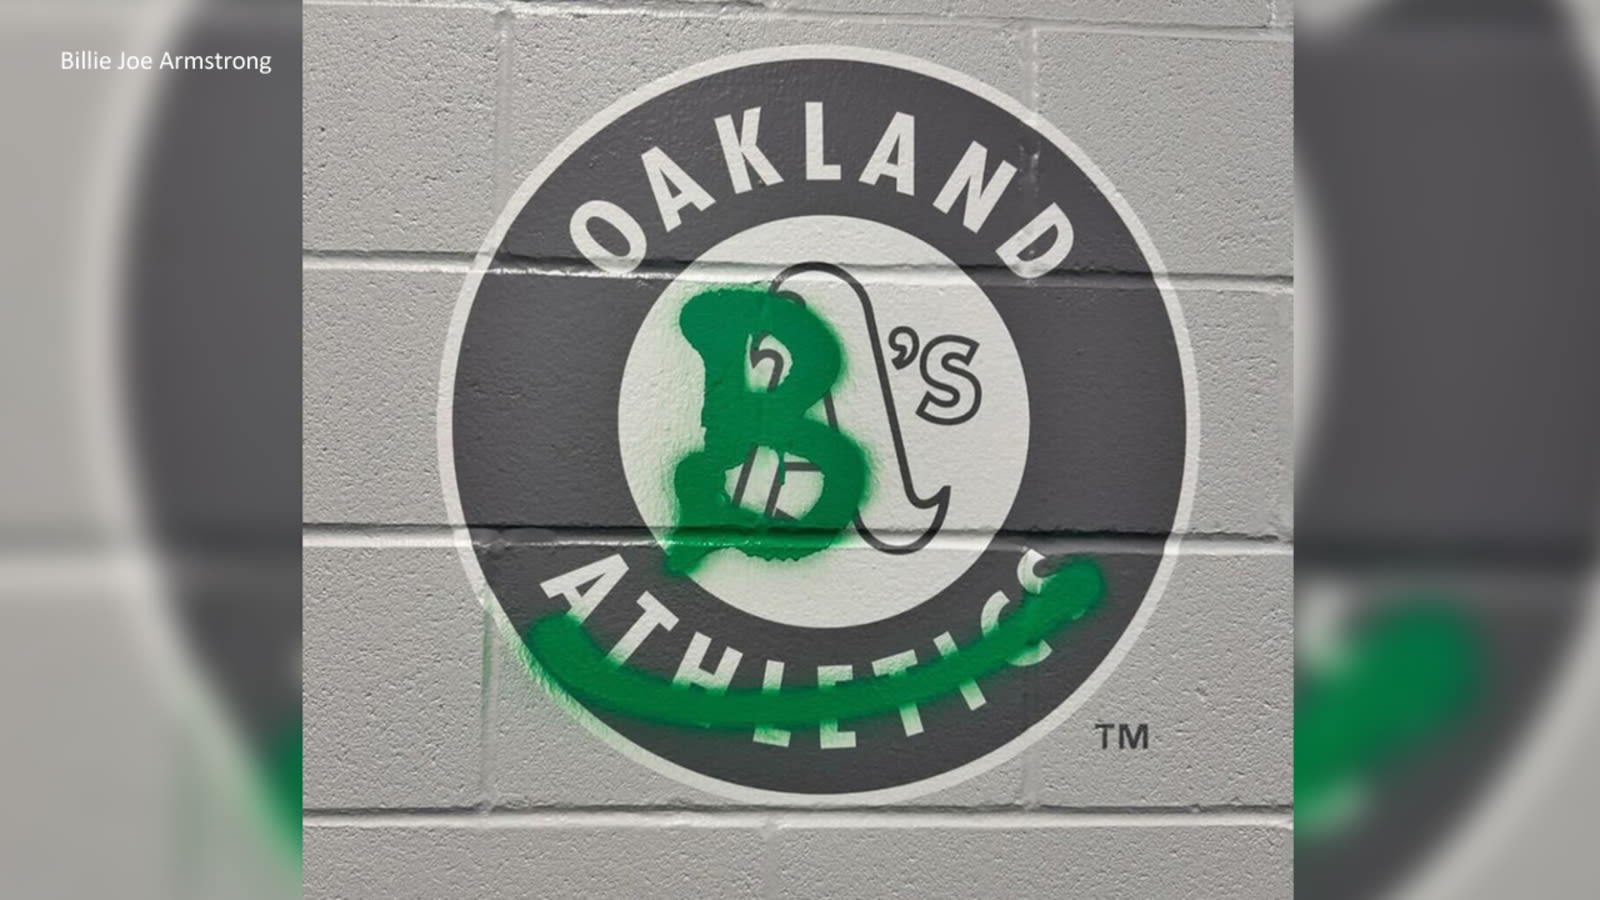 Green Day singer Billie Joe Armstrong defaces Oakland A's logo in Toronto, Instagram post shows